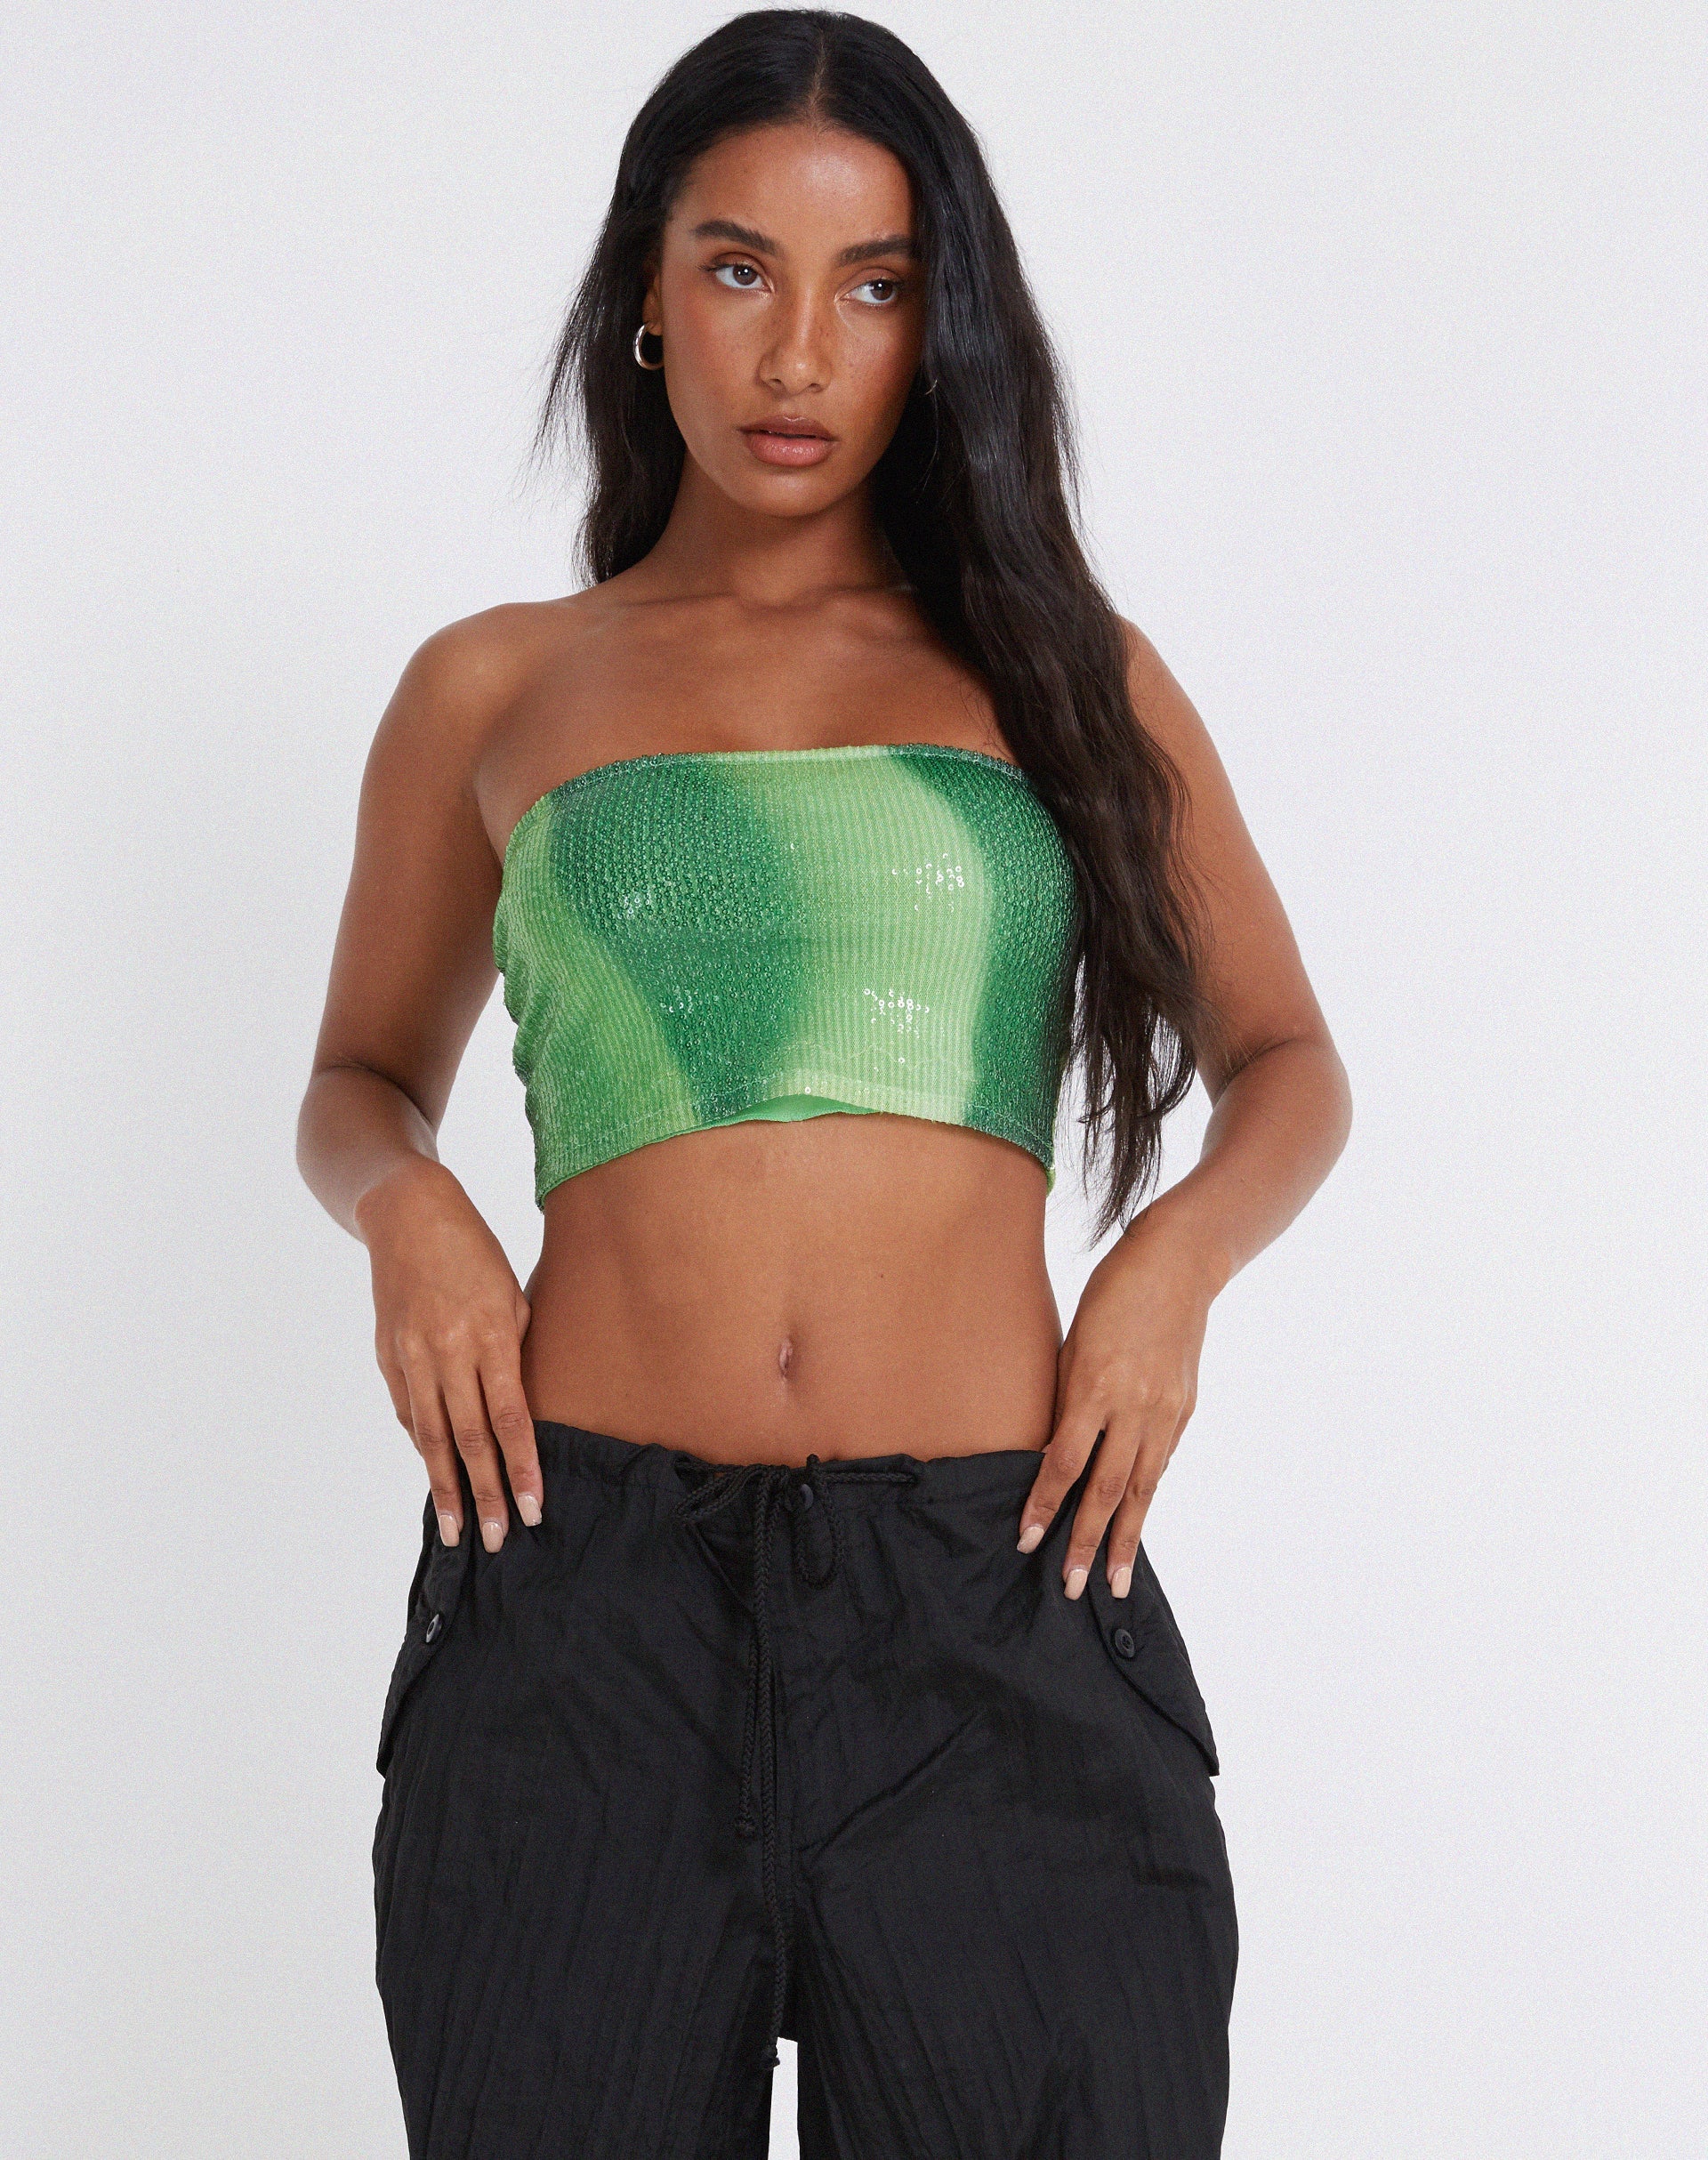 image of Bandira Bandeau Top in Sequin Solarized Green